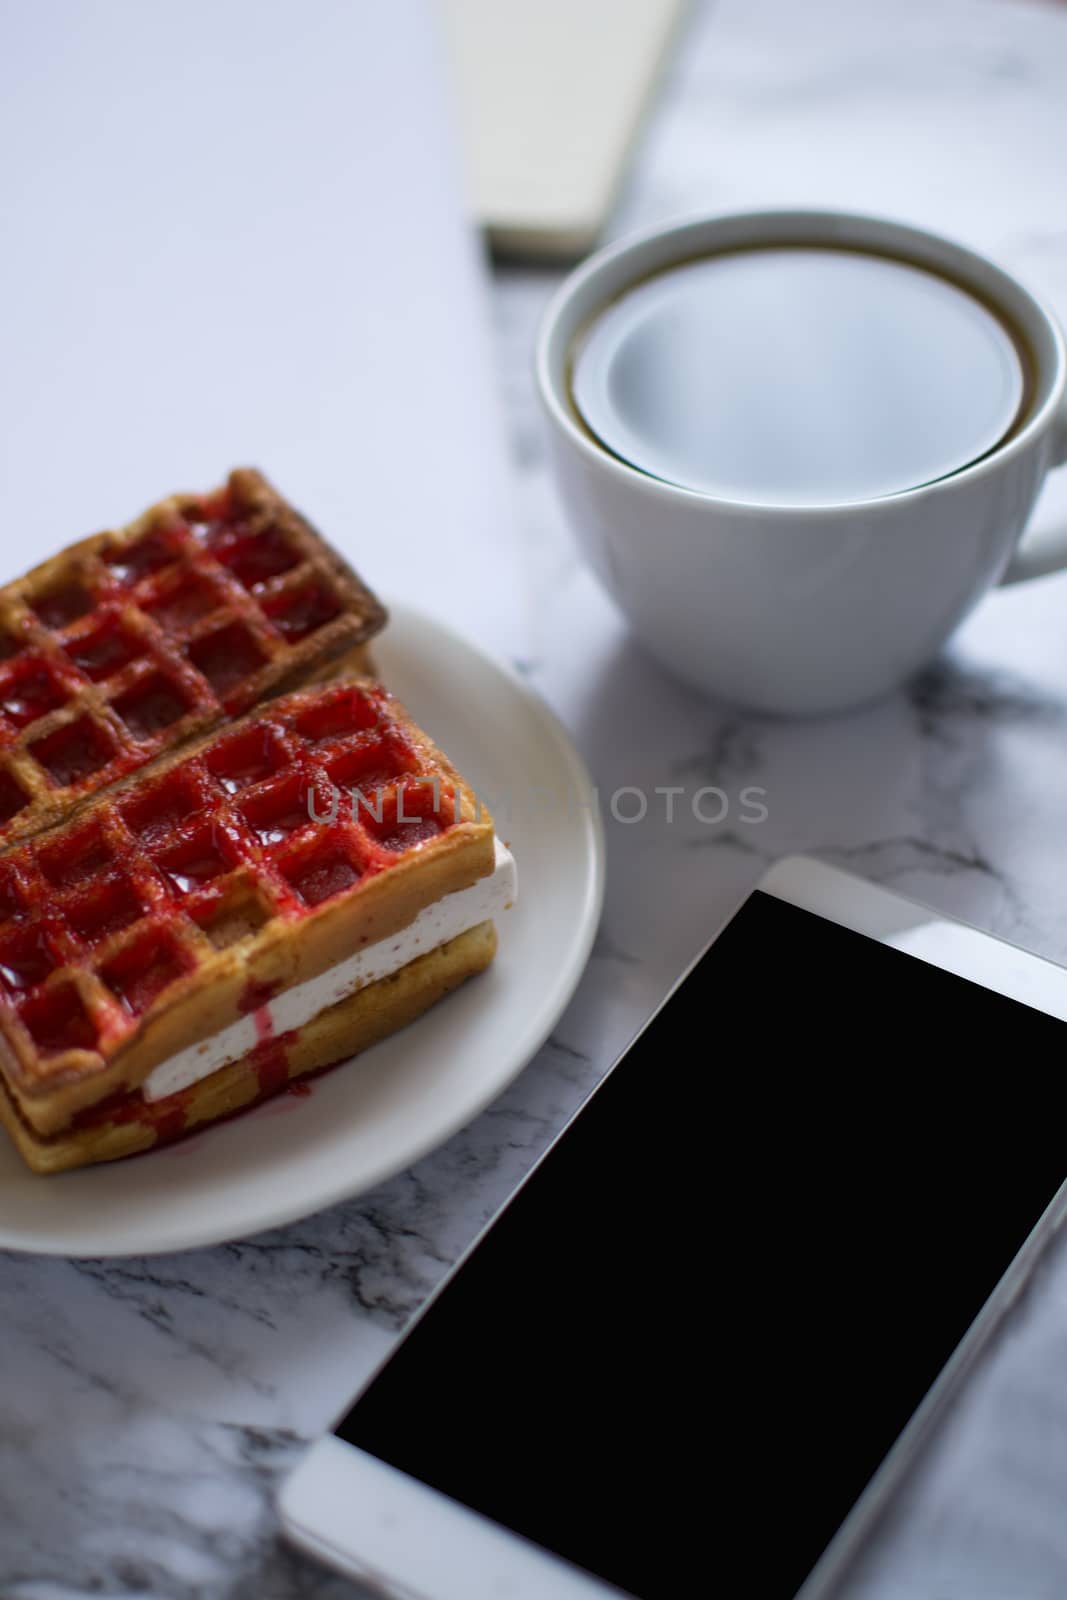 Business lunch: smartphone, dessert, diary on marble background by Izumepho